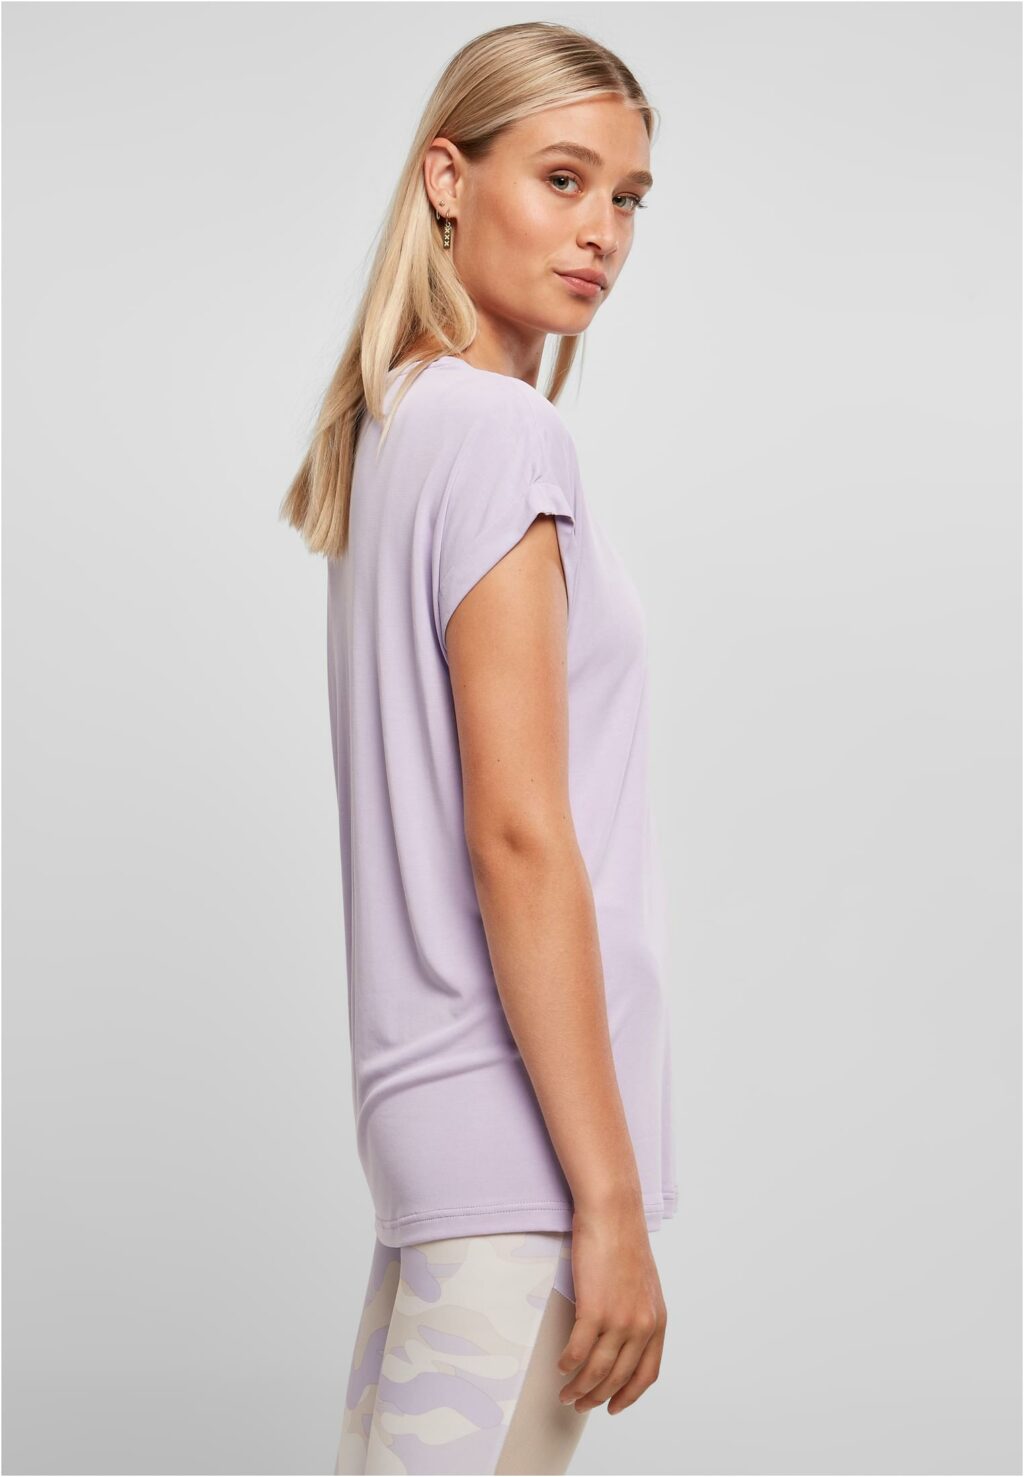 Urban Classics Ladies Modal Extended Shoulder Tee lilac TB4092